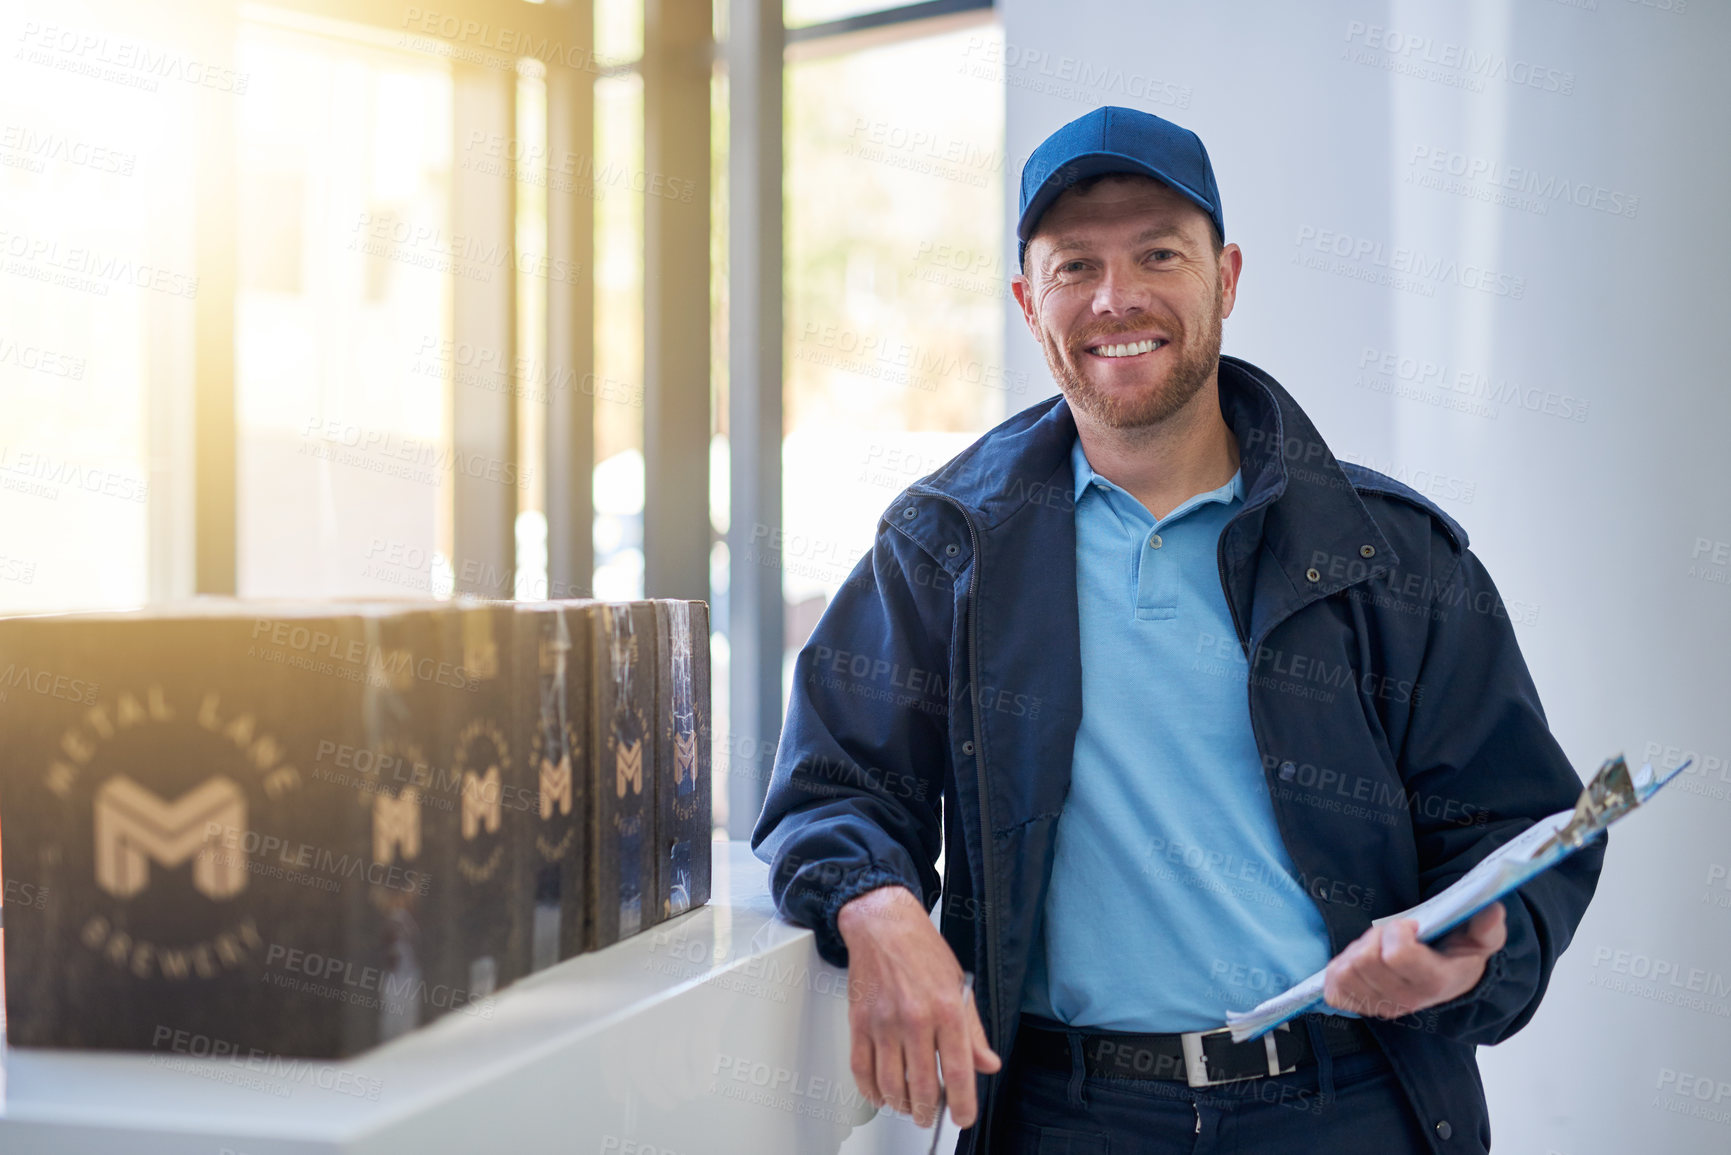 Buy stock photo Cropped portrait of a handsome delivery man waiting in the lobby with a customer's order